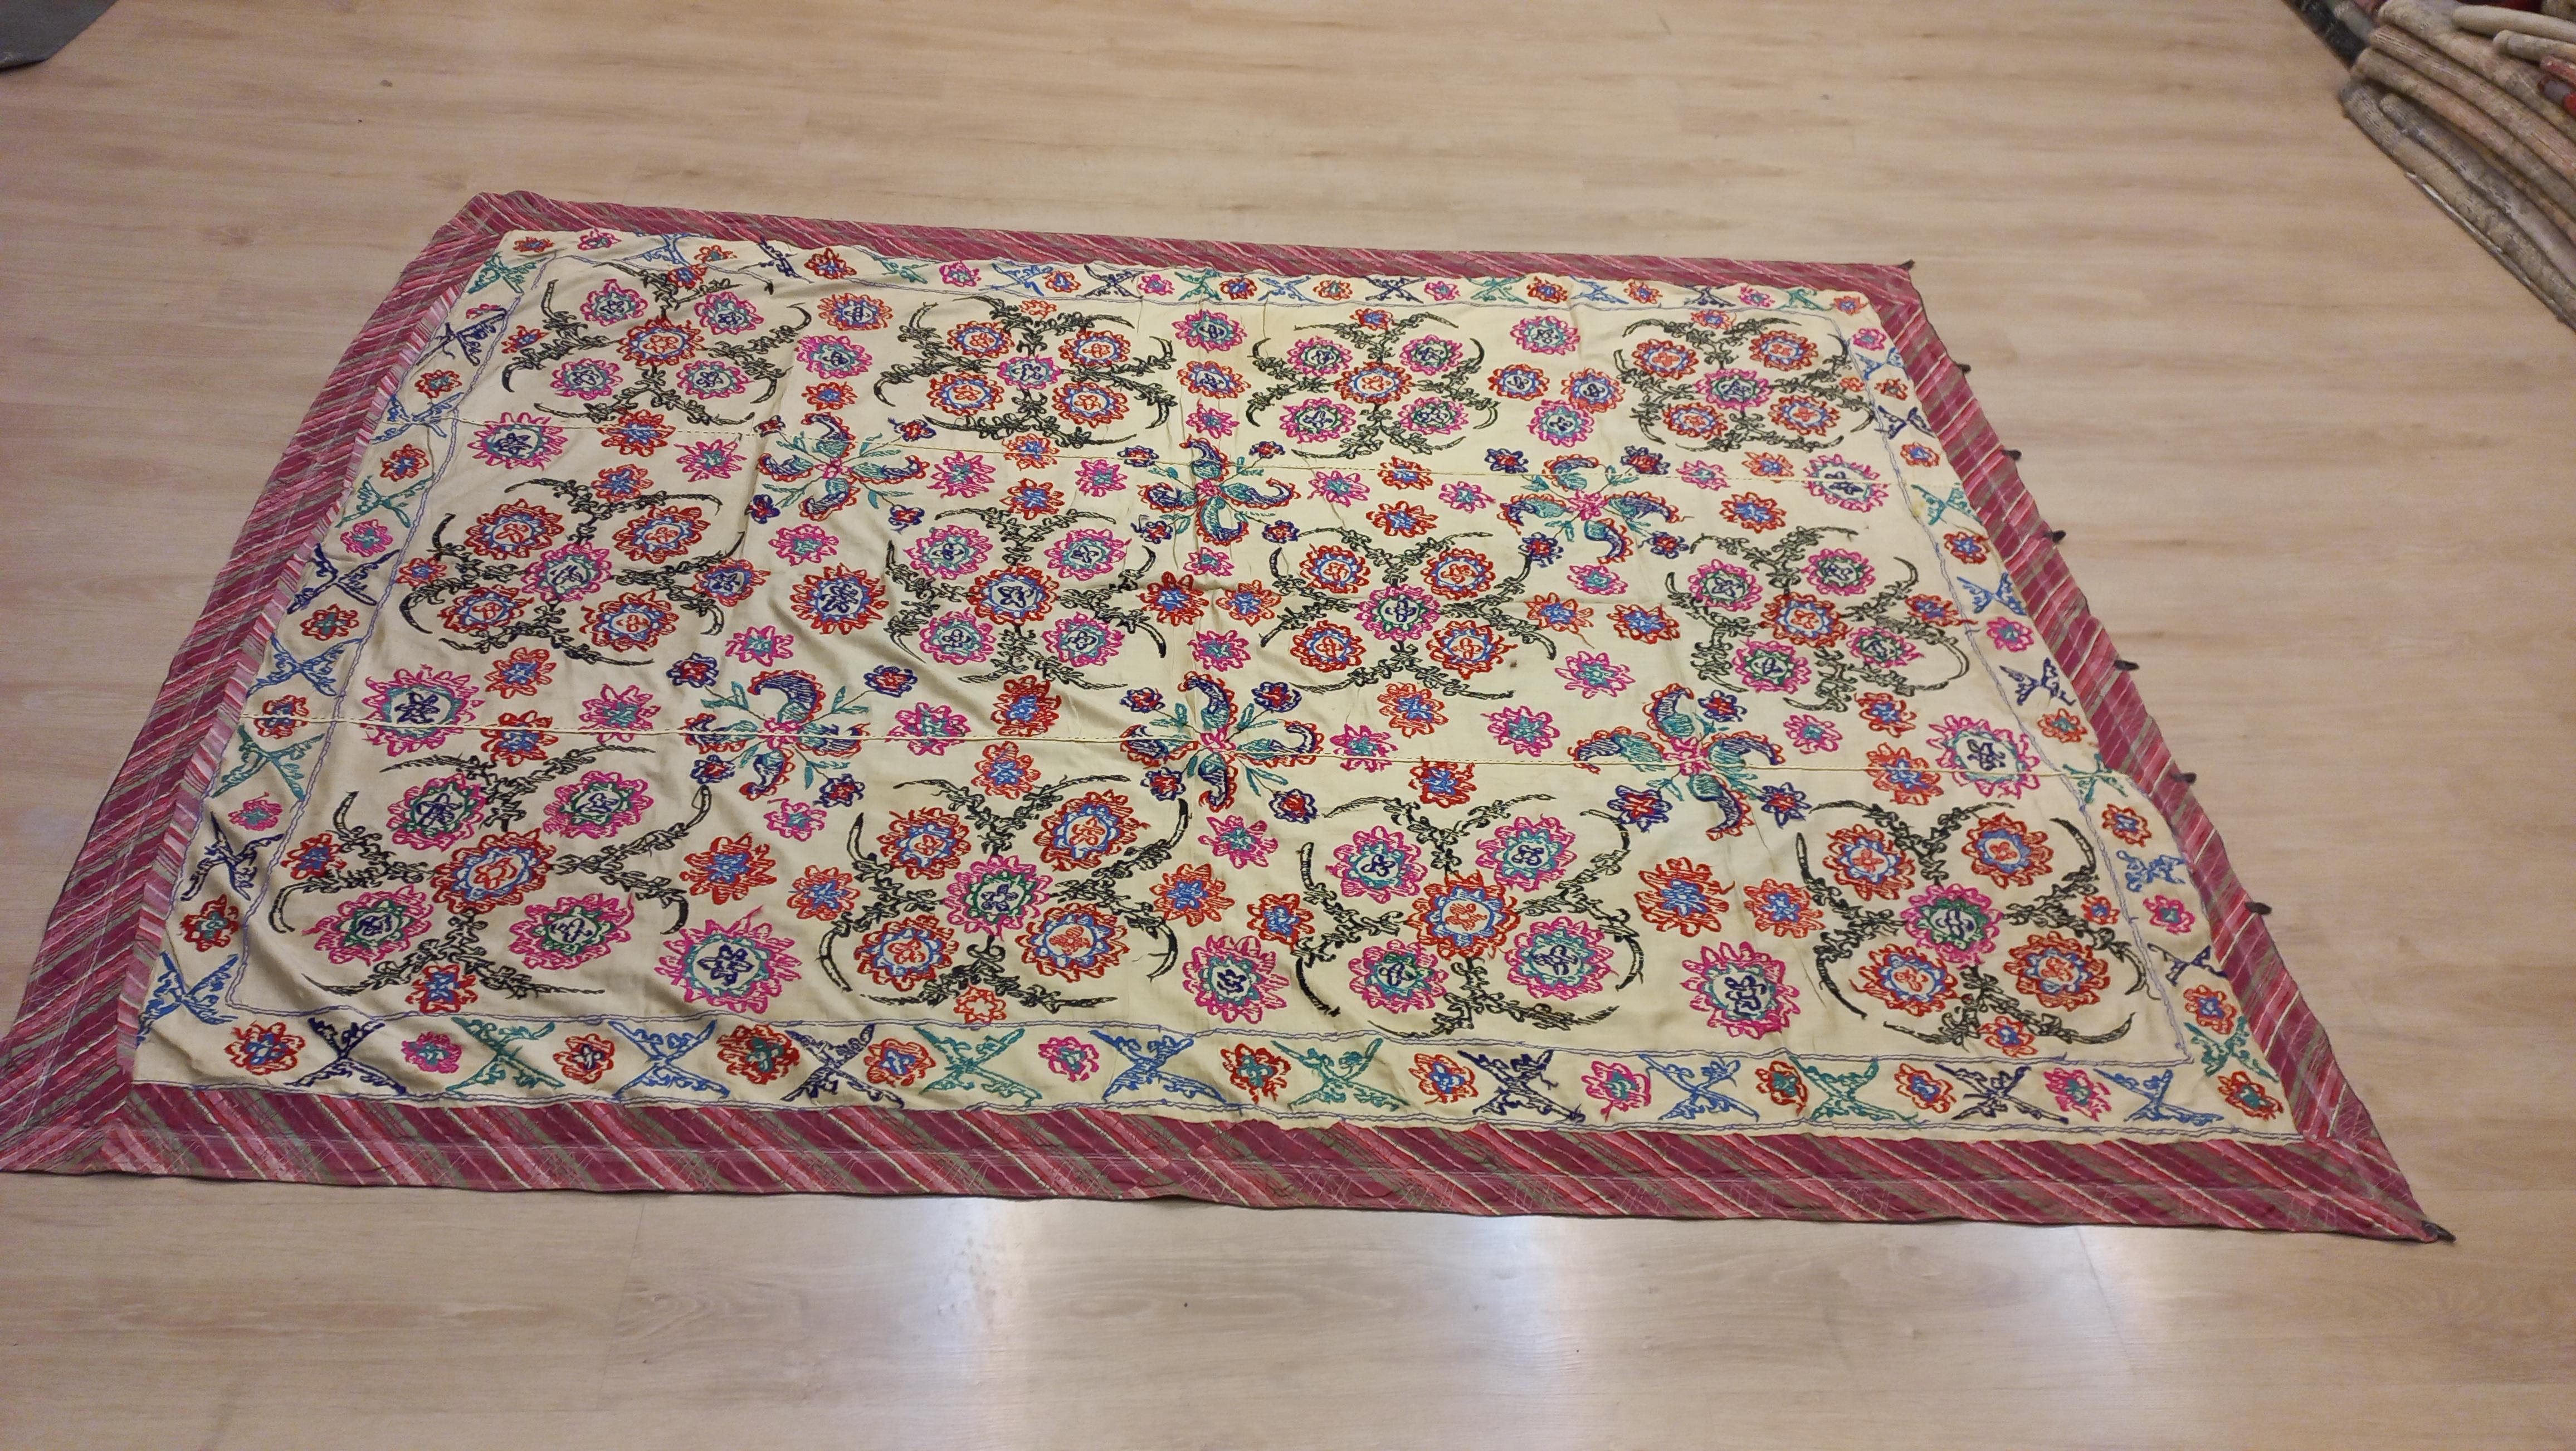 20th Century 5.6x7.4 Ft Decorative Silk Embroidery Bed Cover, Uzbek Vintage Suzani Tablecloth For Sale